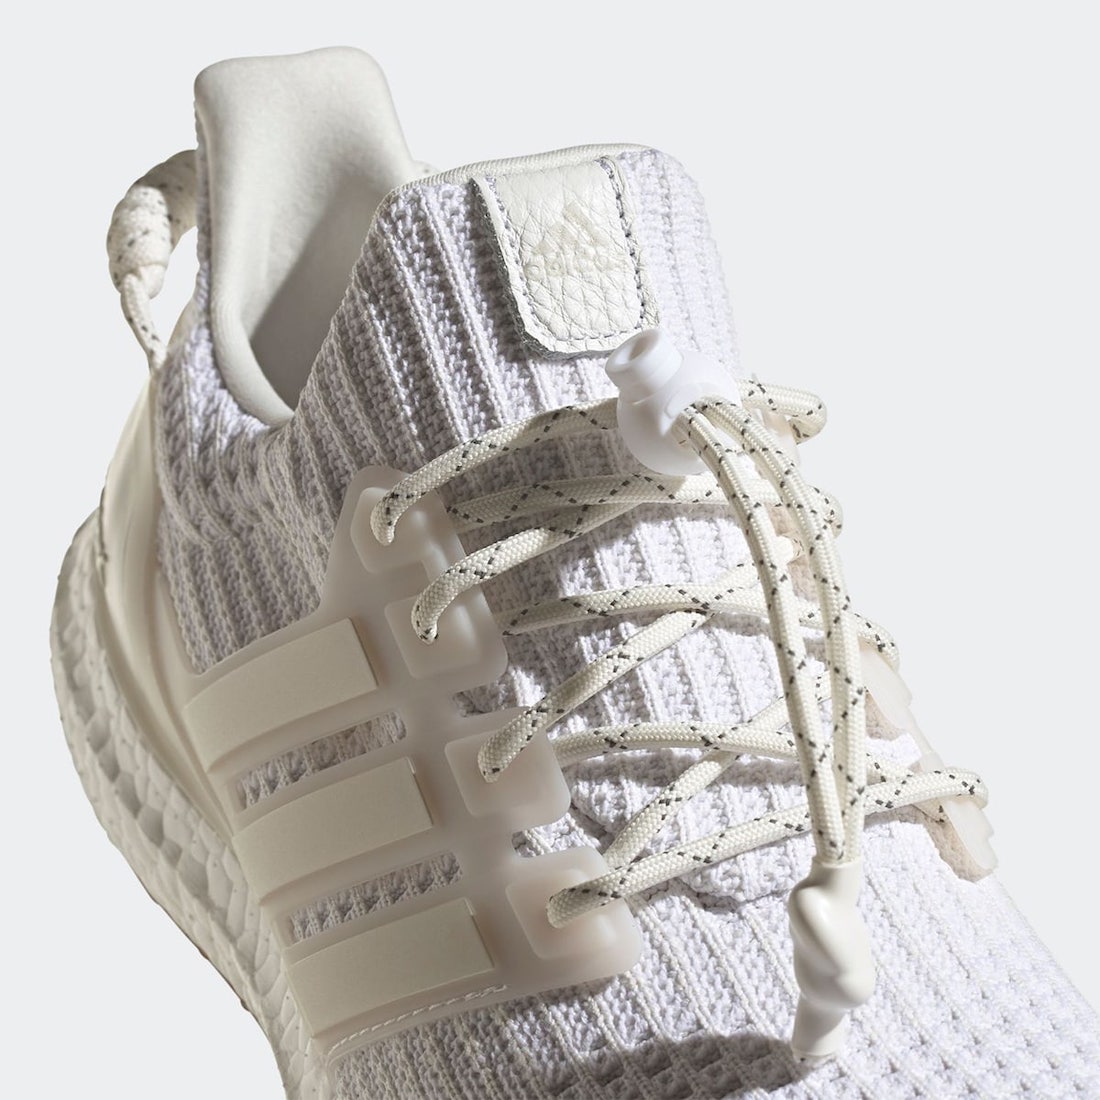 Beyonce Ivy Park adidas Ultra Boost White Gum GX5370 Release Date